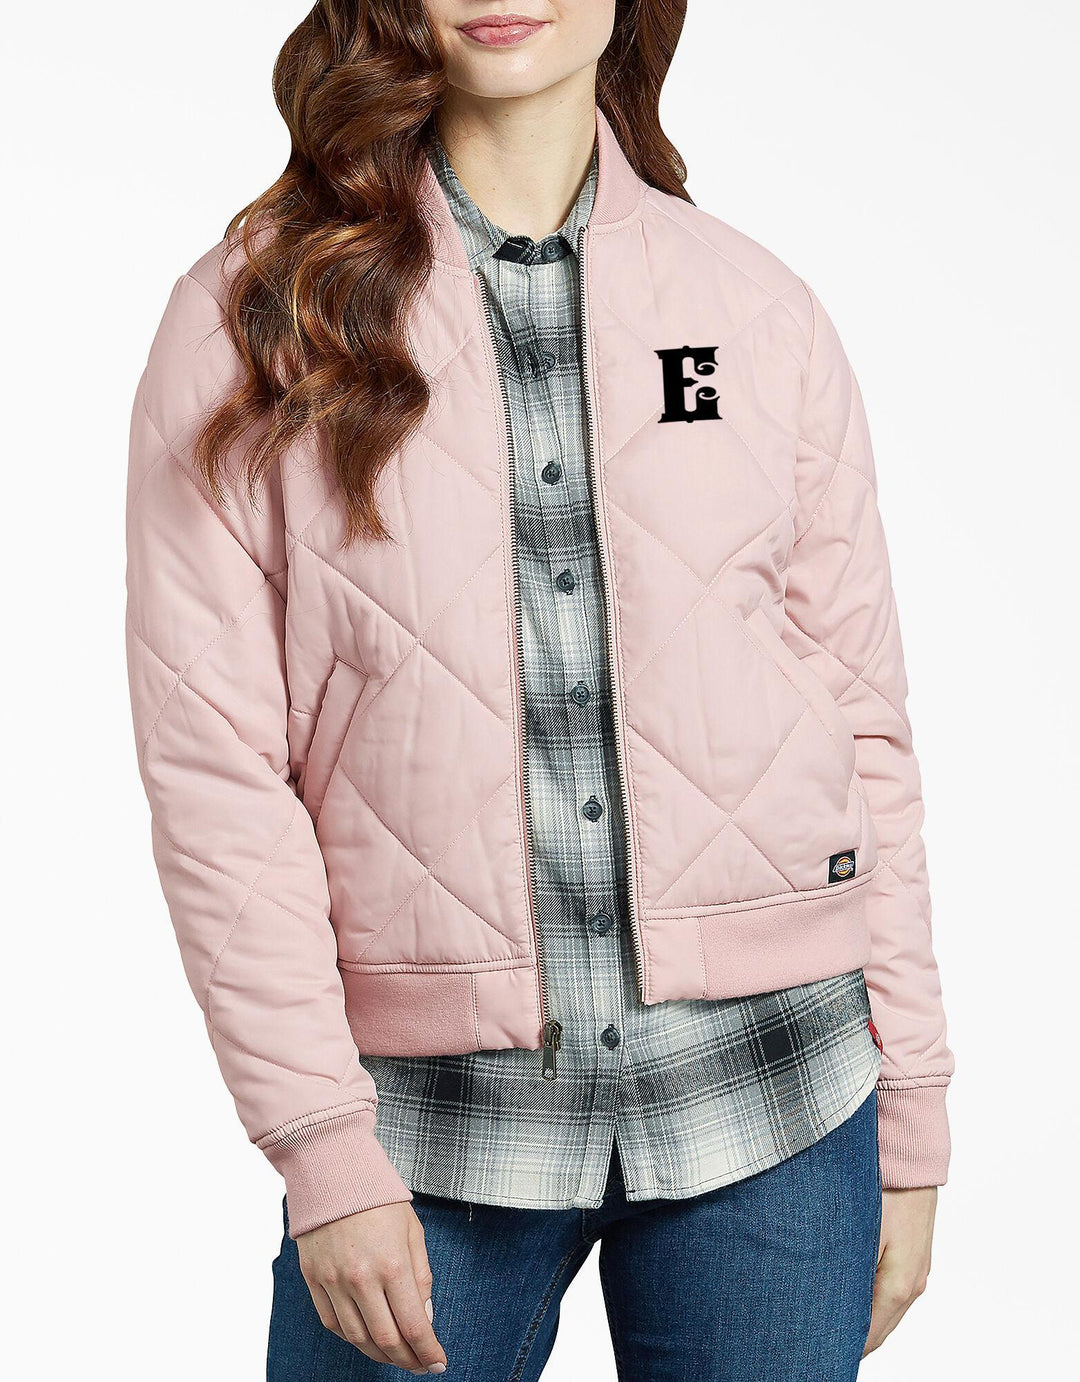 Dickies Pink Bomber Jacket With E Logo - Espinoza's Leather